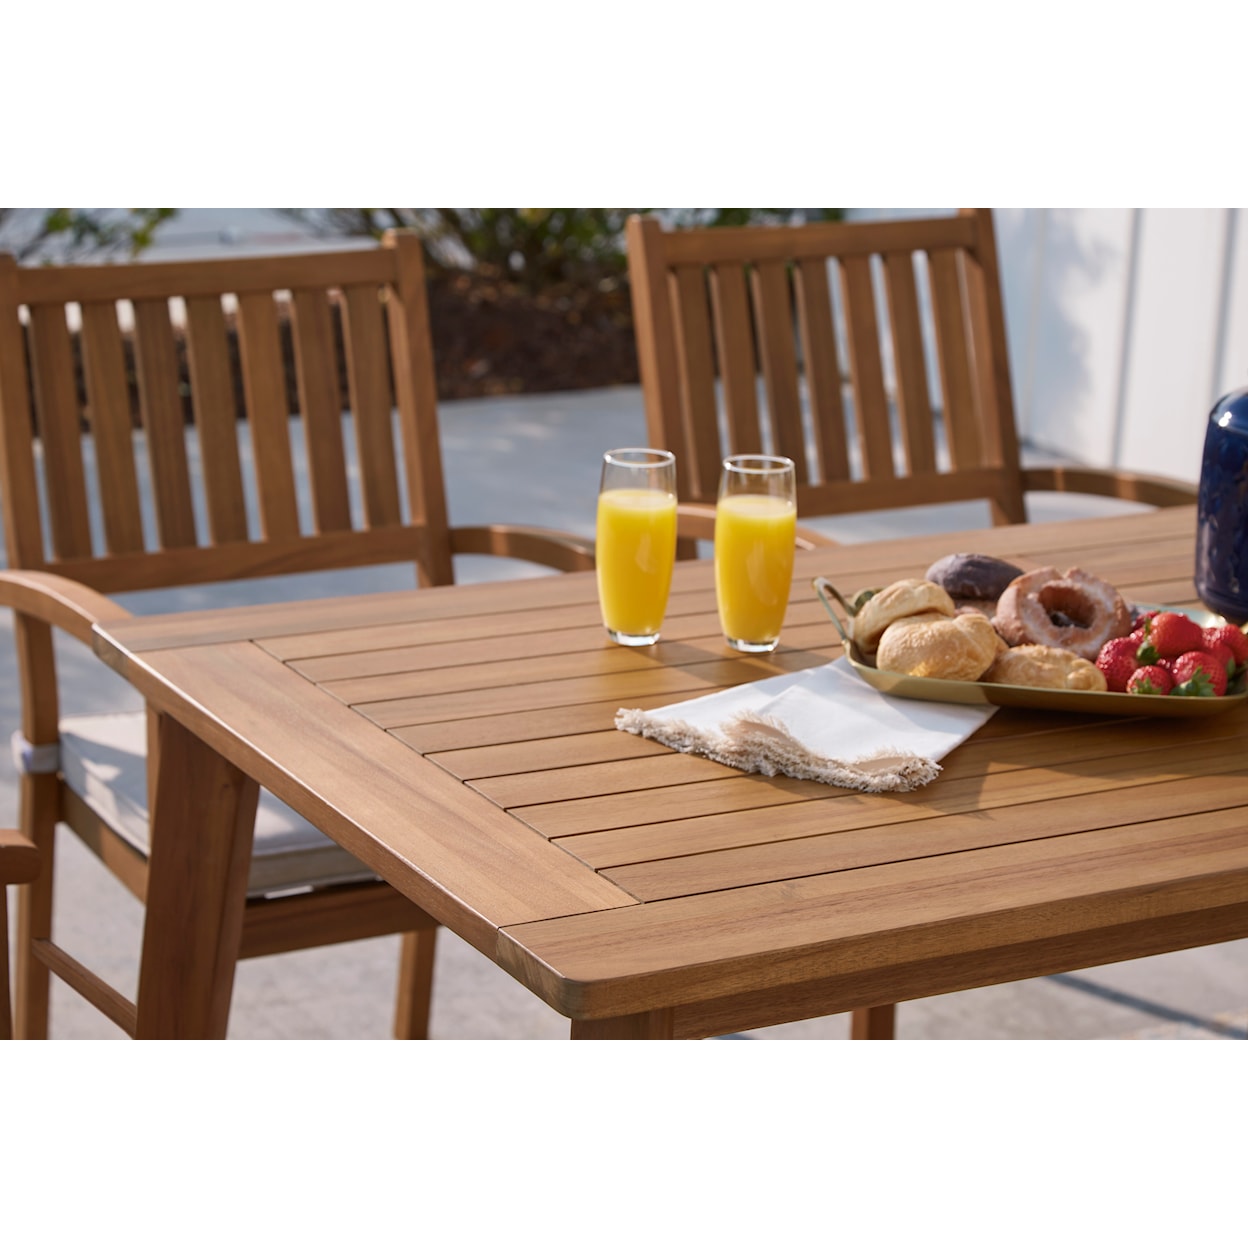 Signature Design by Ashley Janiyah Outdoor Dining Table with 4 Chairs